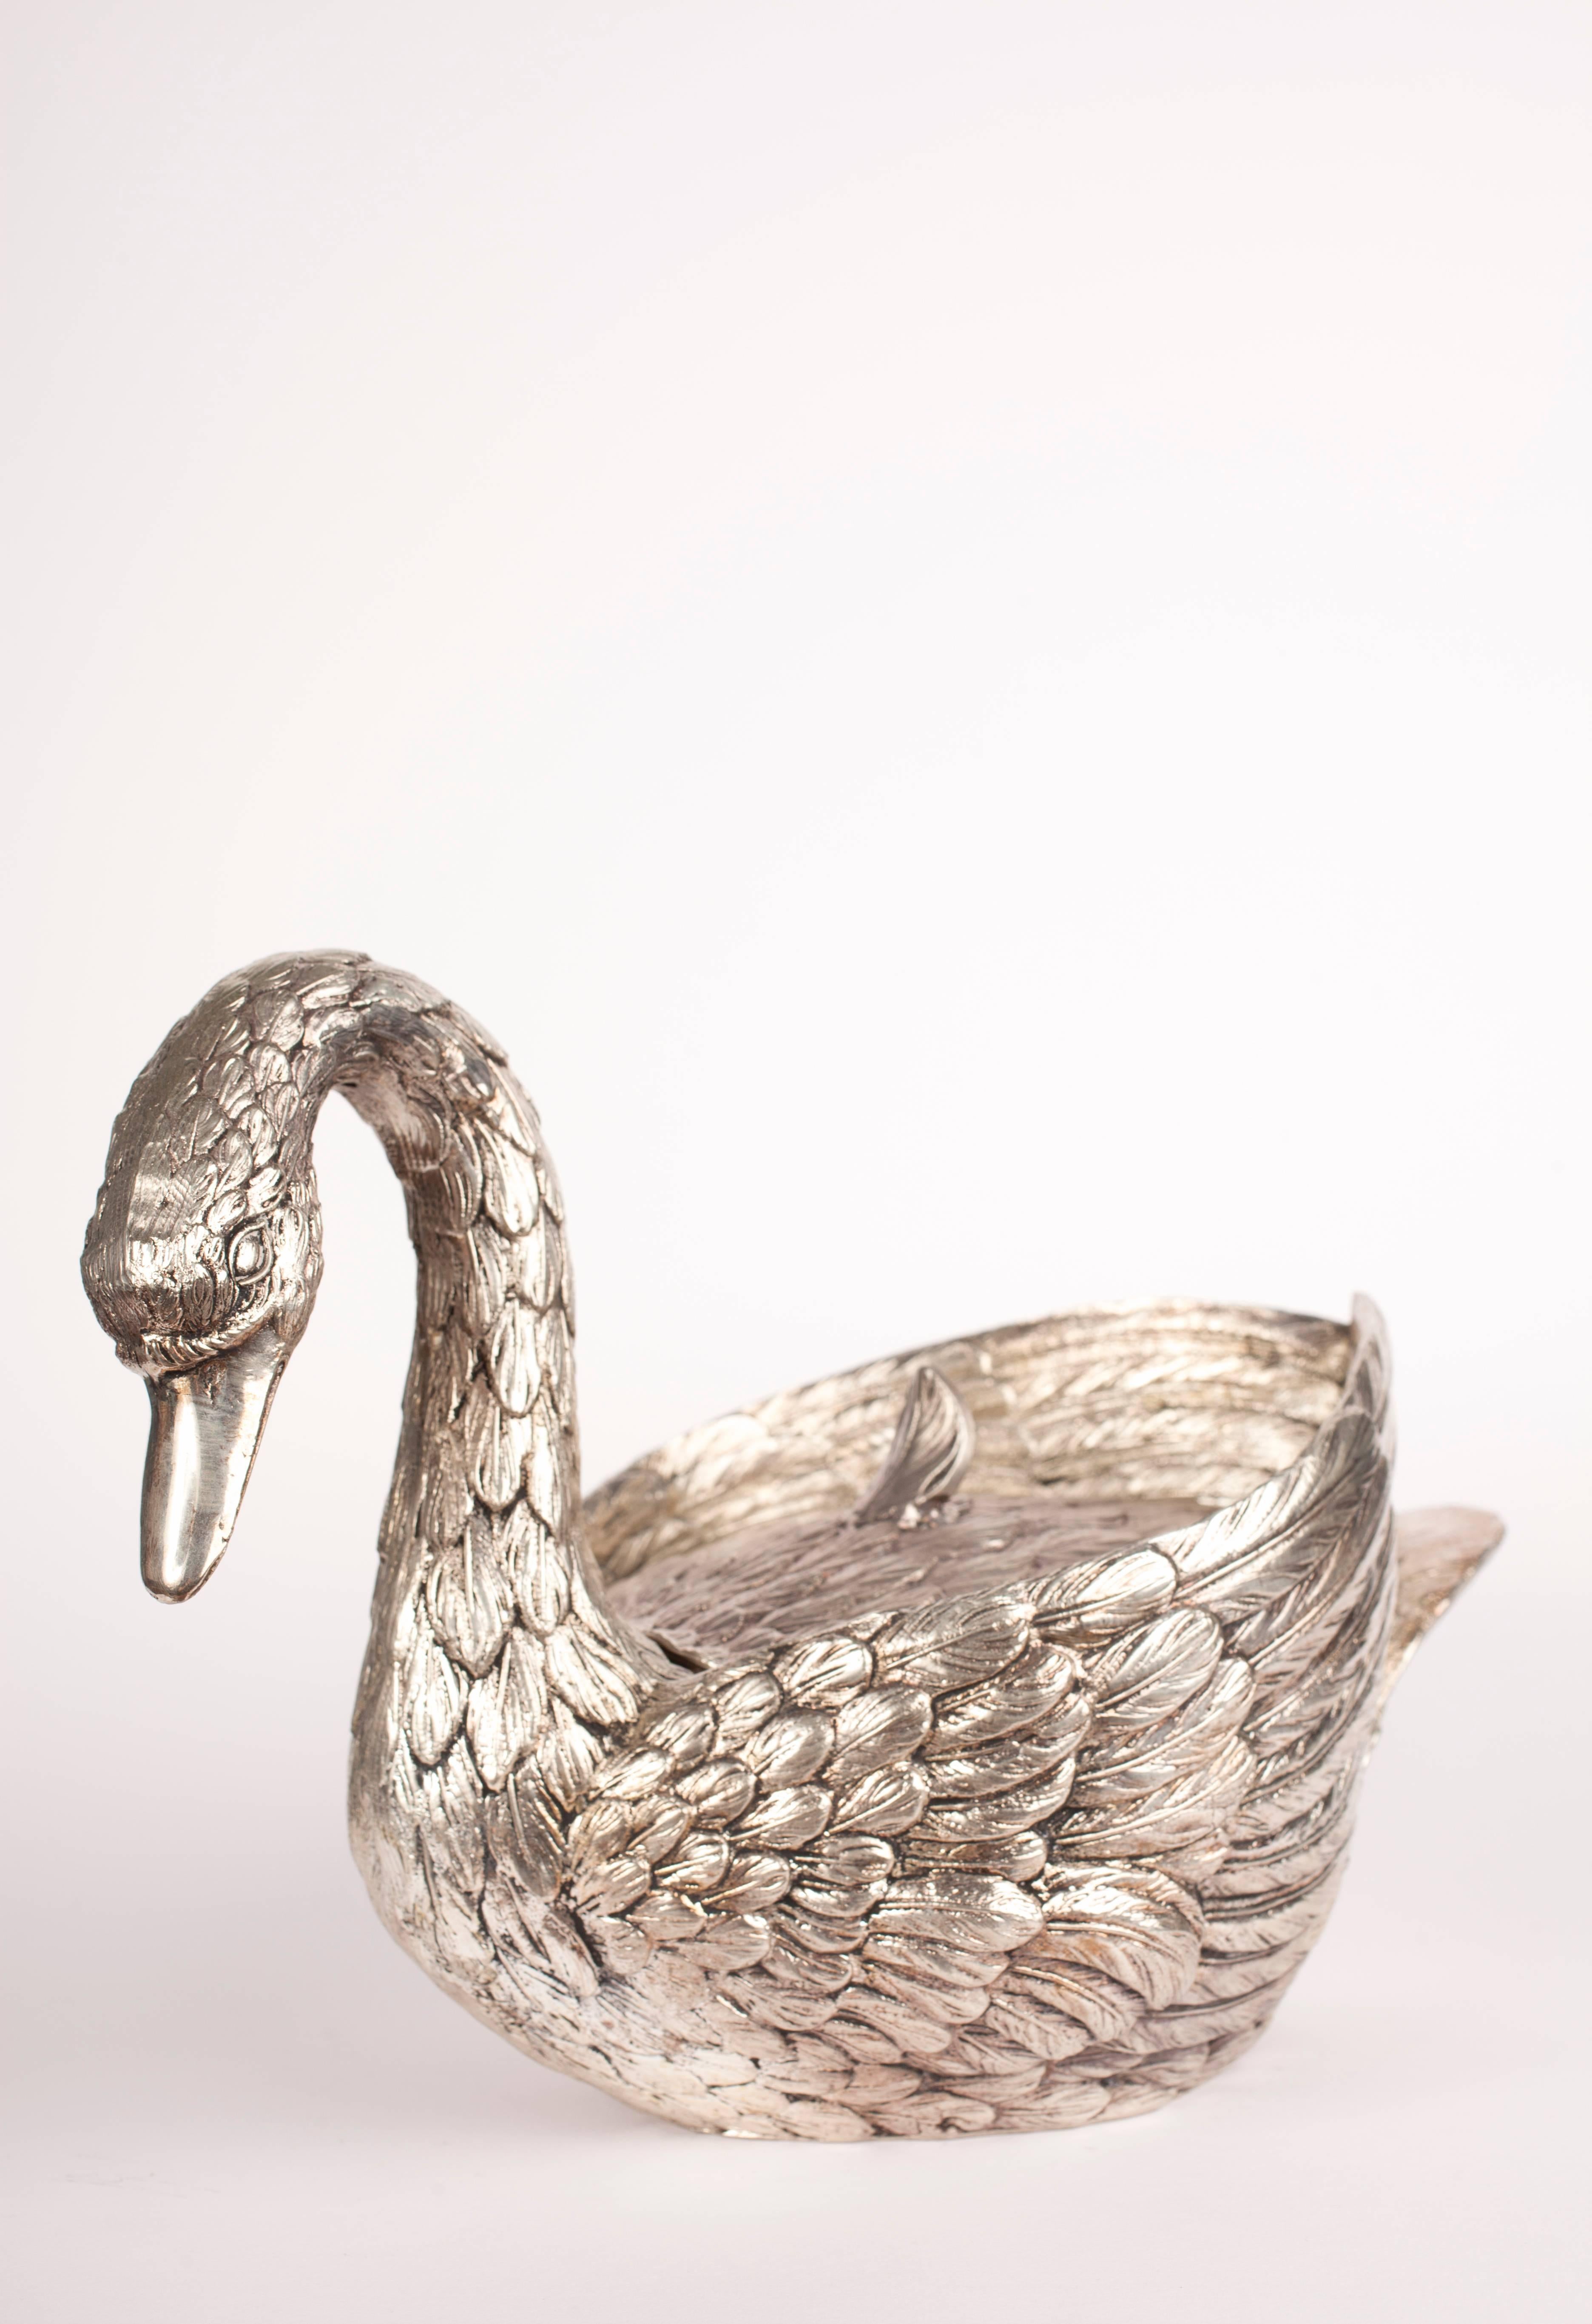 Beautiful ice bucket by Mauro Manetti in the form of a swan, expertly cast in metal and silver plated with a plastic ice tray. The condition is fantastic commensurate with age.